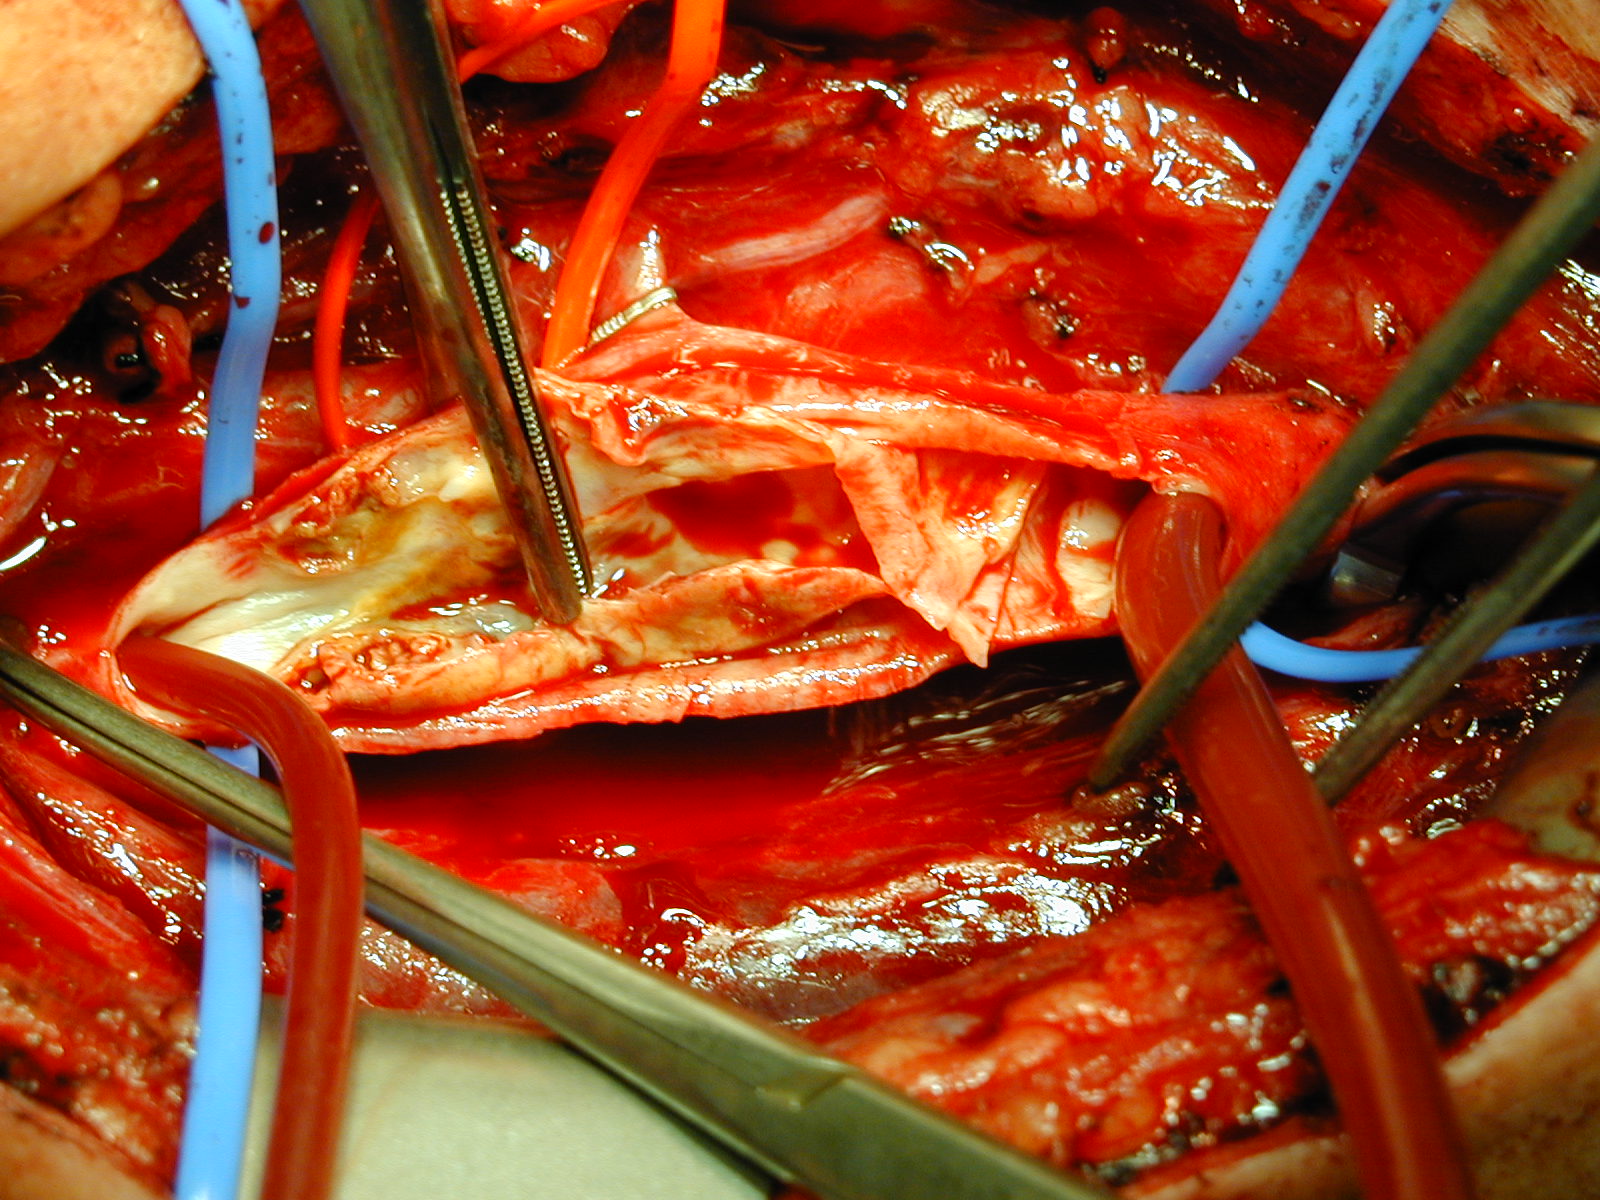 Carotid Endarterectomy. The carotid artery has been isolated and a shunt has been inserted to maintain blood flow. The atherosclerotic plaque would be removed along with the inner layer of the vessel wall to restore patency and arterial flow to the brain.